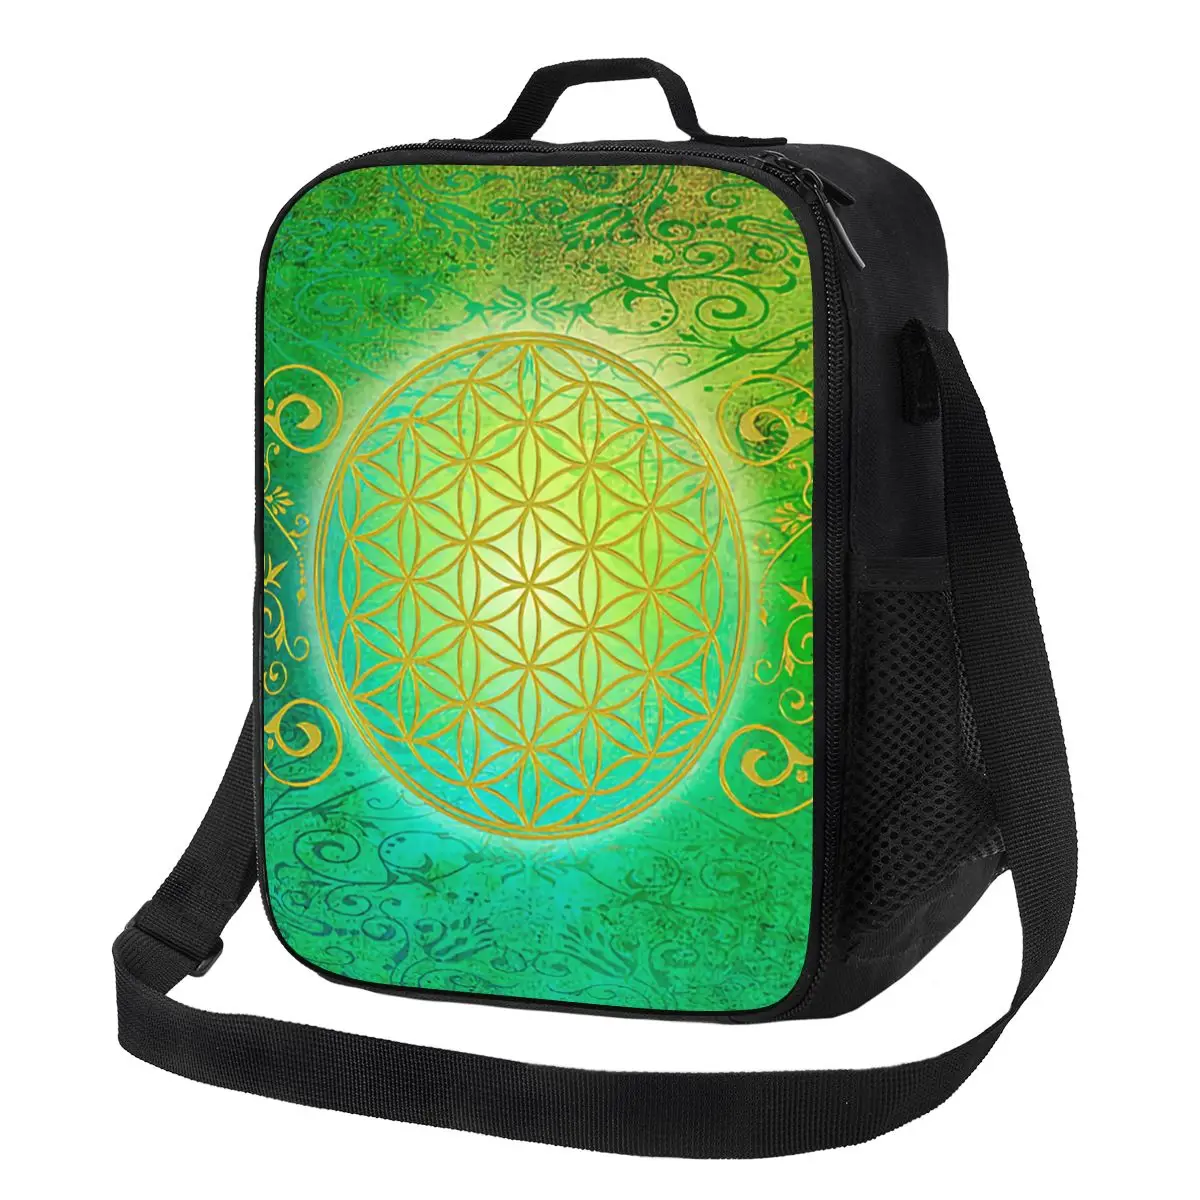 

Elegant Geometric Flower Of Life Insulated Lunch Bags for School Office Geometric Mandala Leakproof Thermal Cooler Lunch Box